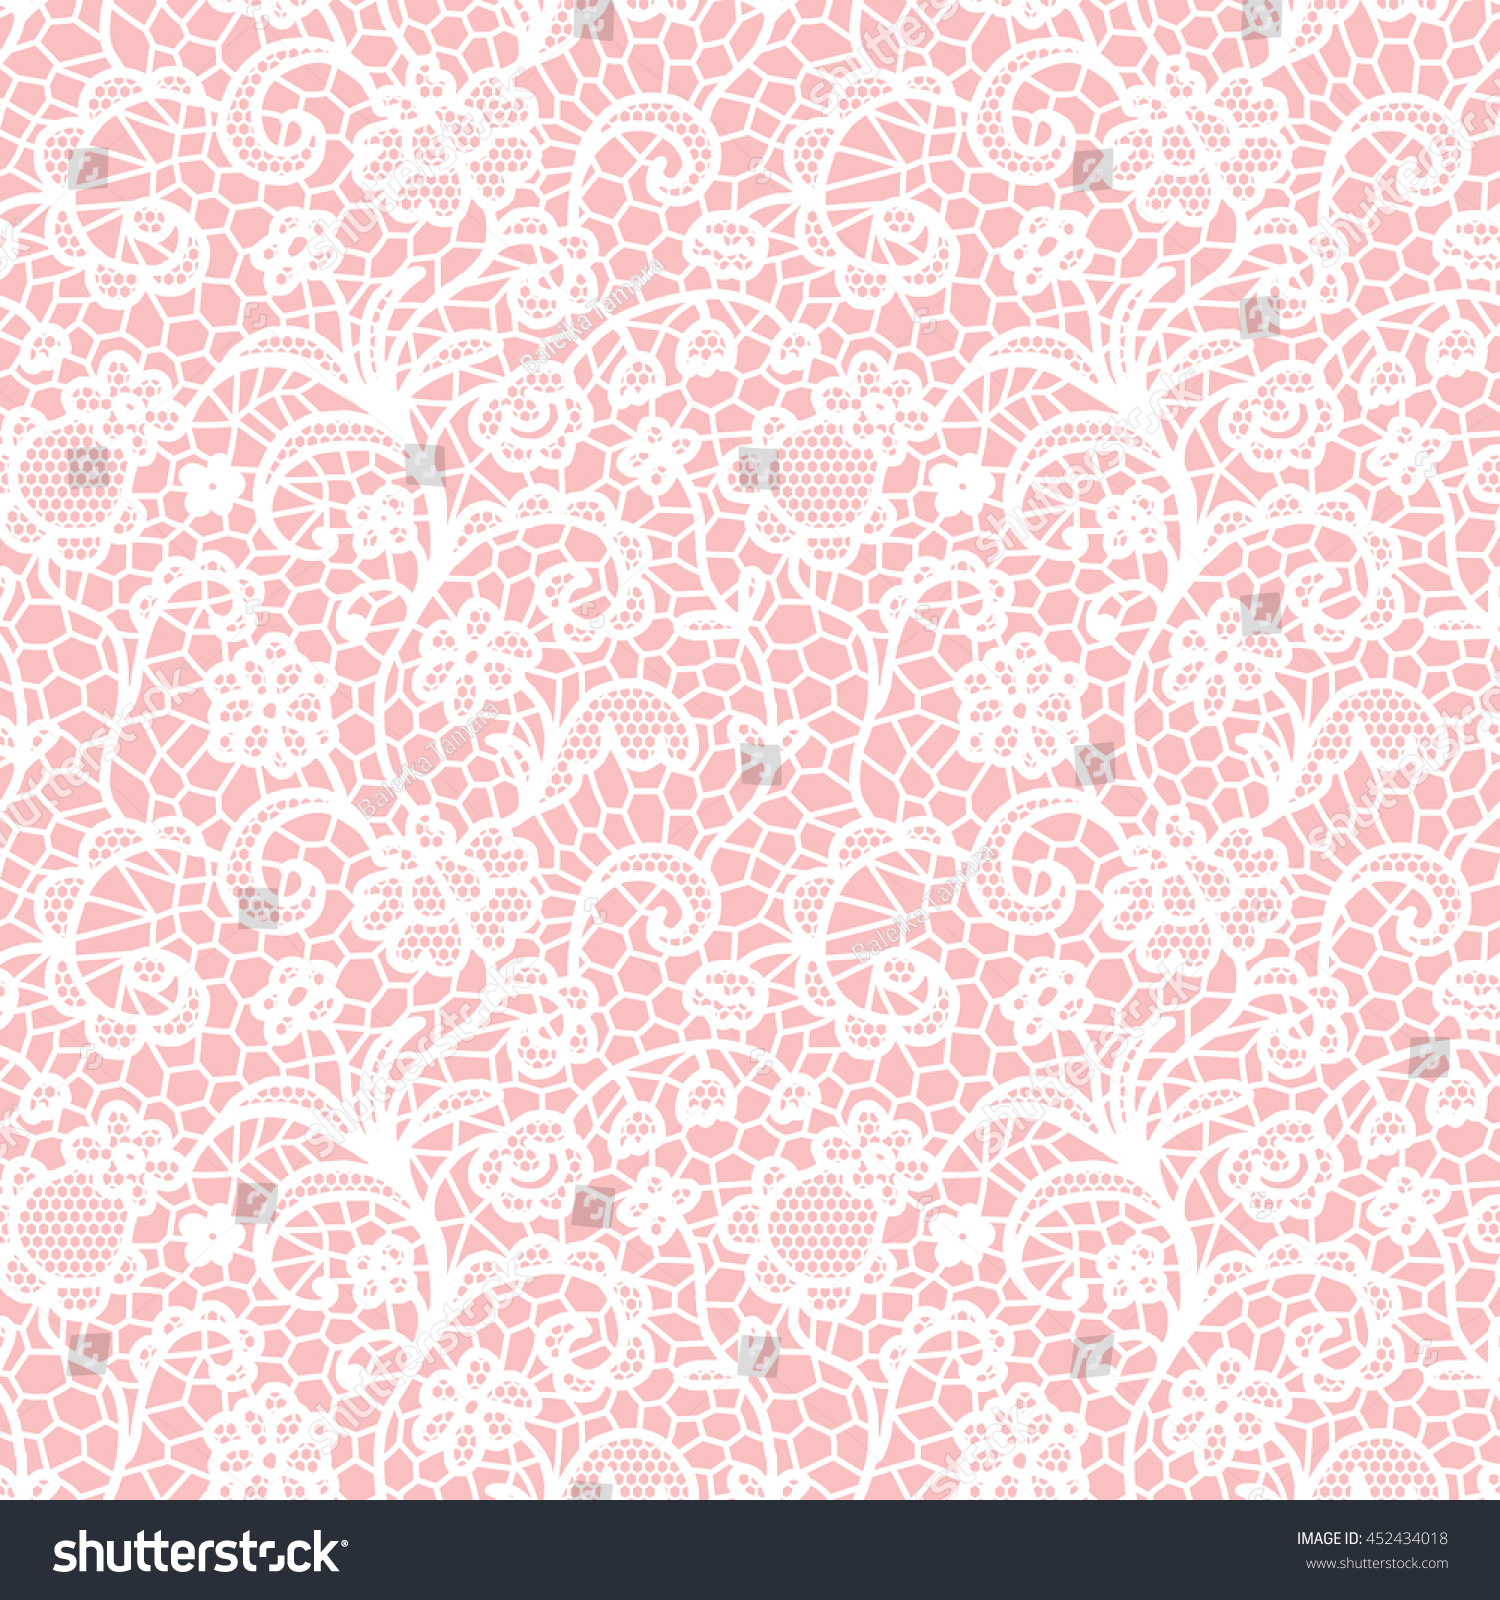 White Lace Seamless Pattern Flowers On Stock Vector 452434018 ...